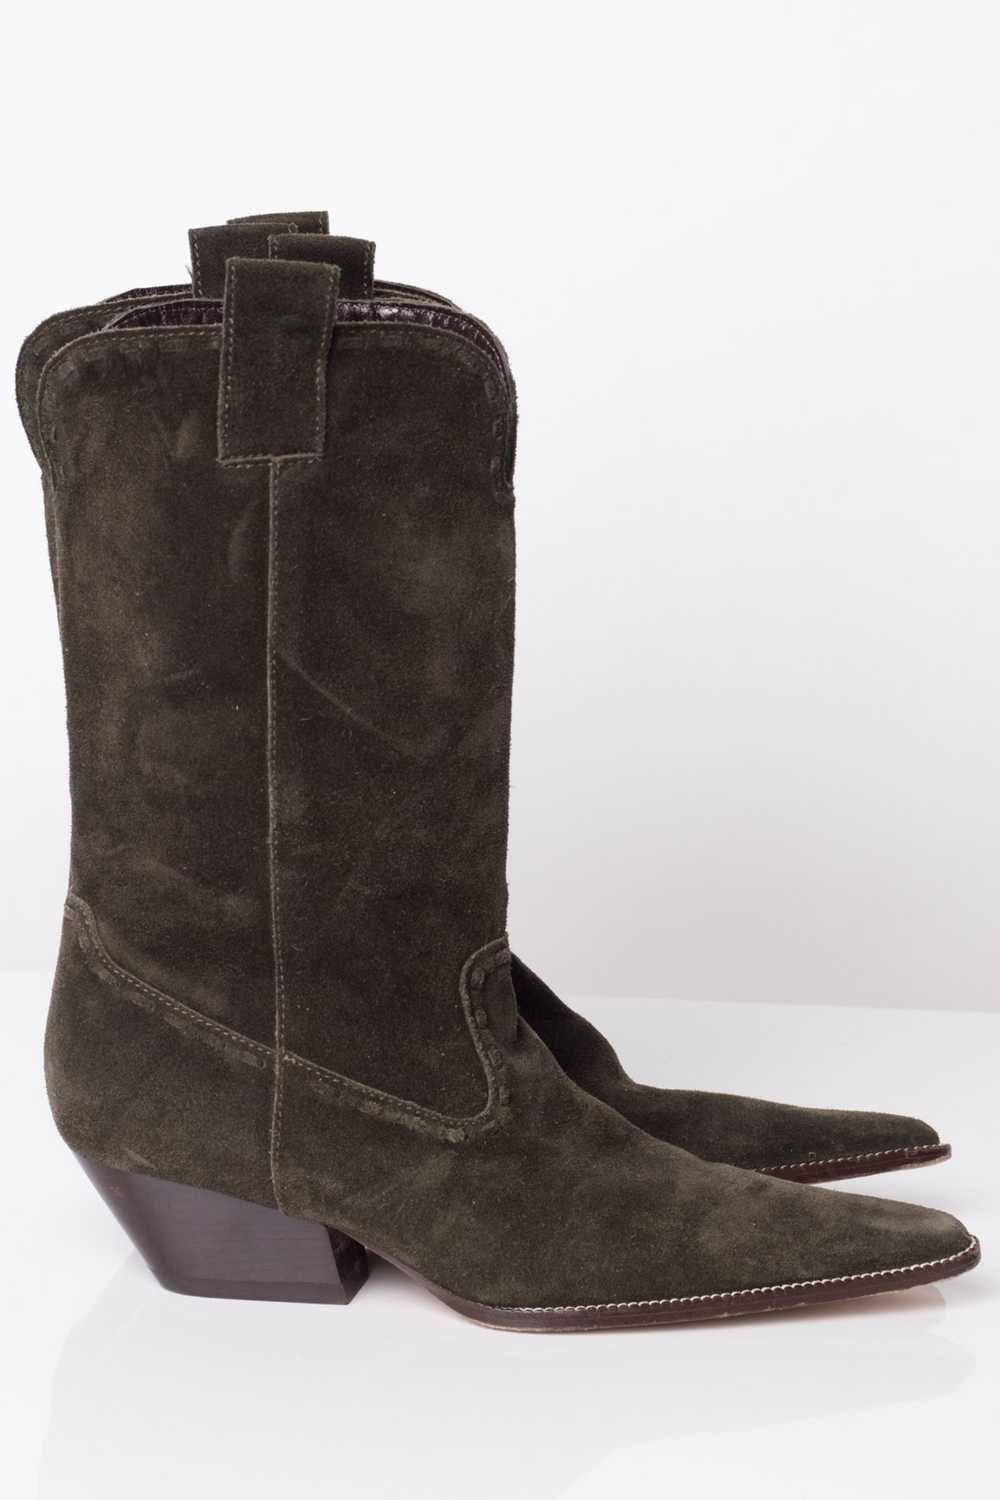 Michael Kors Green Suede Boots (6.5 M) - image 1